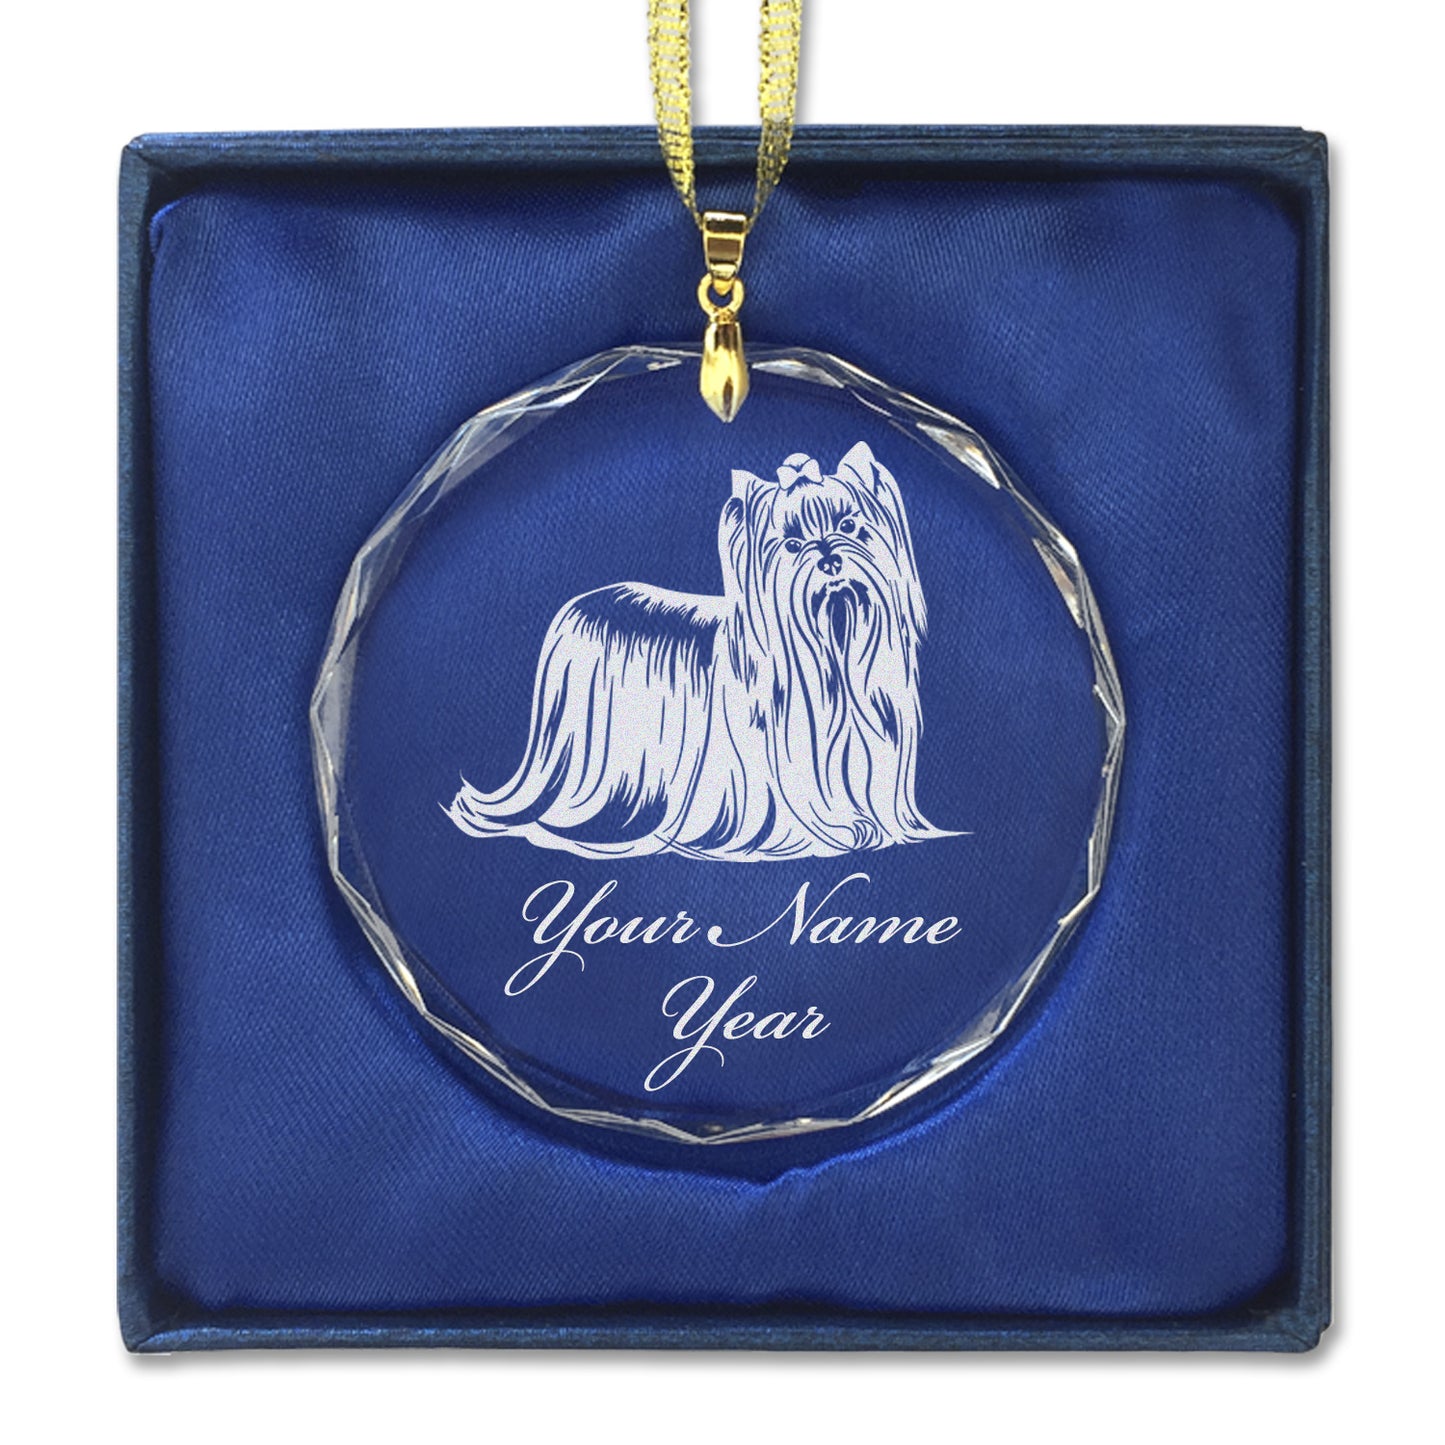 LaserGram Christmas Ornament, Yorkshire Terrier Dog, Personalized Engraving Included (Round Shape)